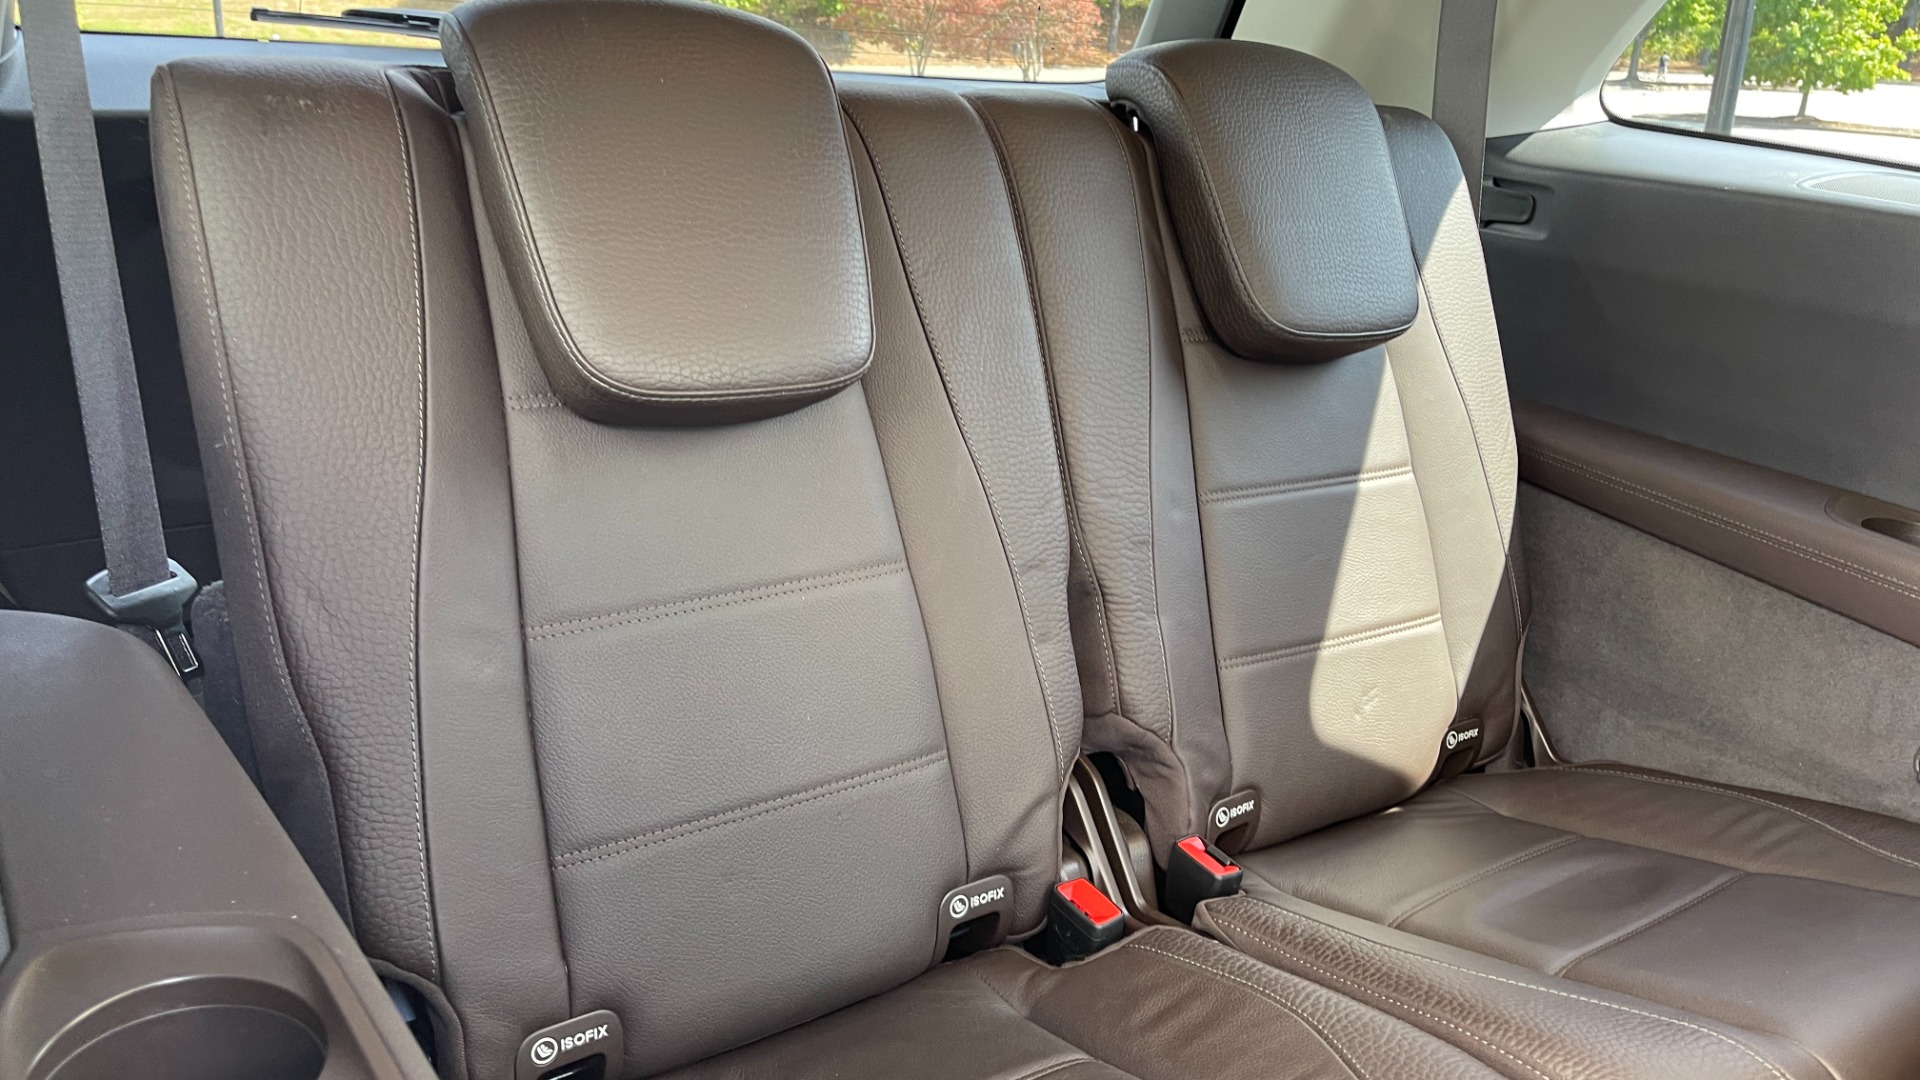 Used 2020 Mercedes-Benz GLS GLS 450 / 3 ROW / CAPTAINS CHAIRS / MASSAGE / NAV / HEADS UP DISPLAY for sale $69,999 at Formula Imports in Charlotte NC 28227 19